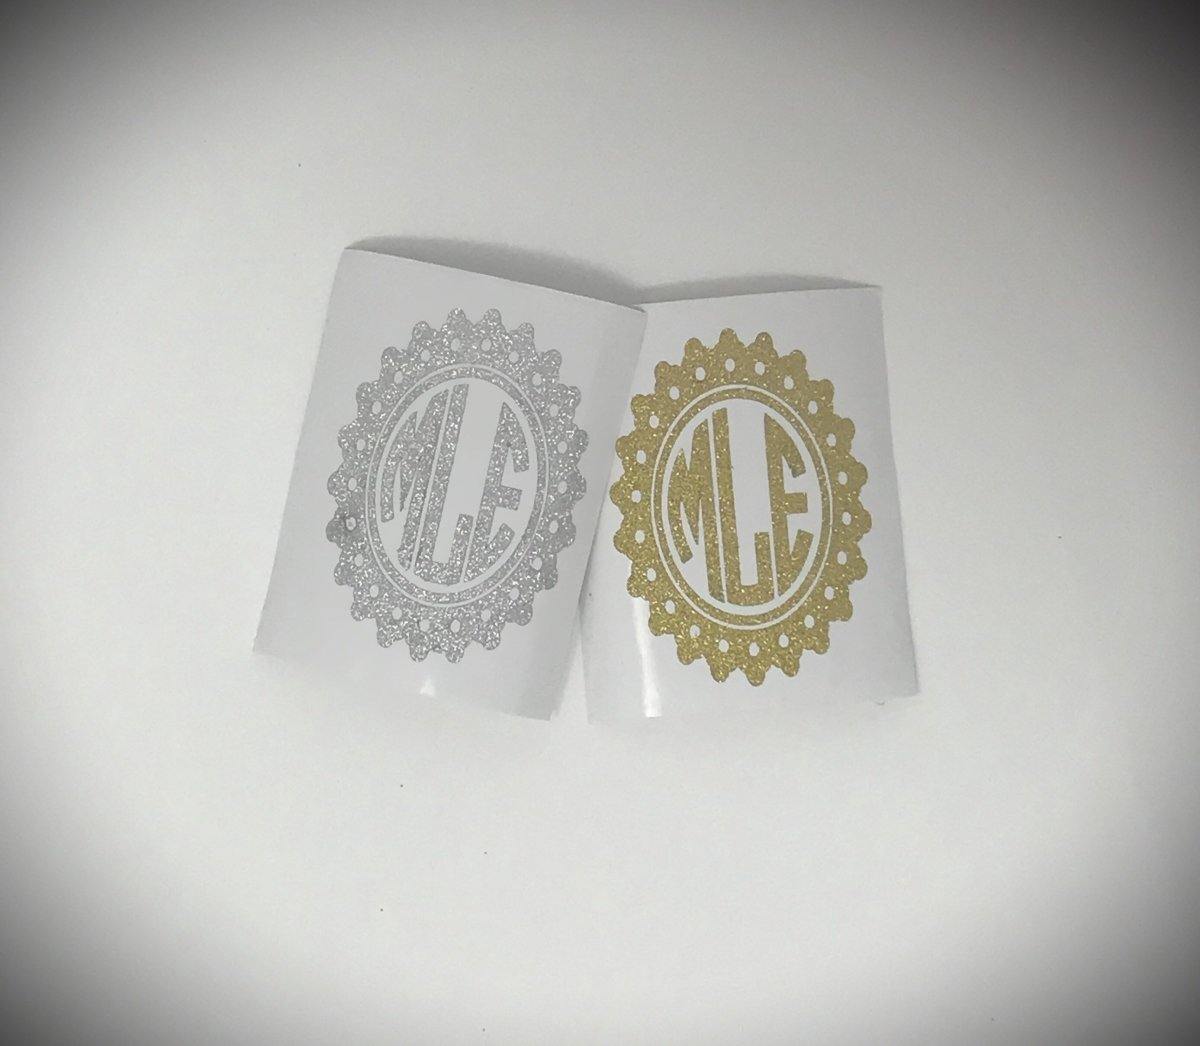 Monogramed cellphone decal - This & That Solutions - Monogramed cellphone decal - Personalized Gifts & Custom Home Decor